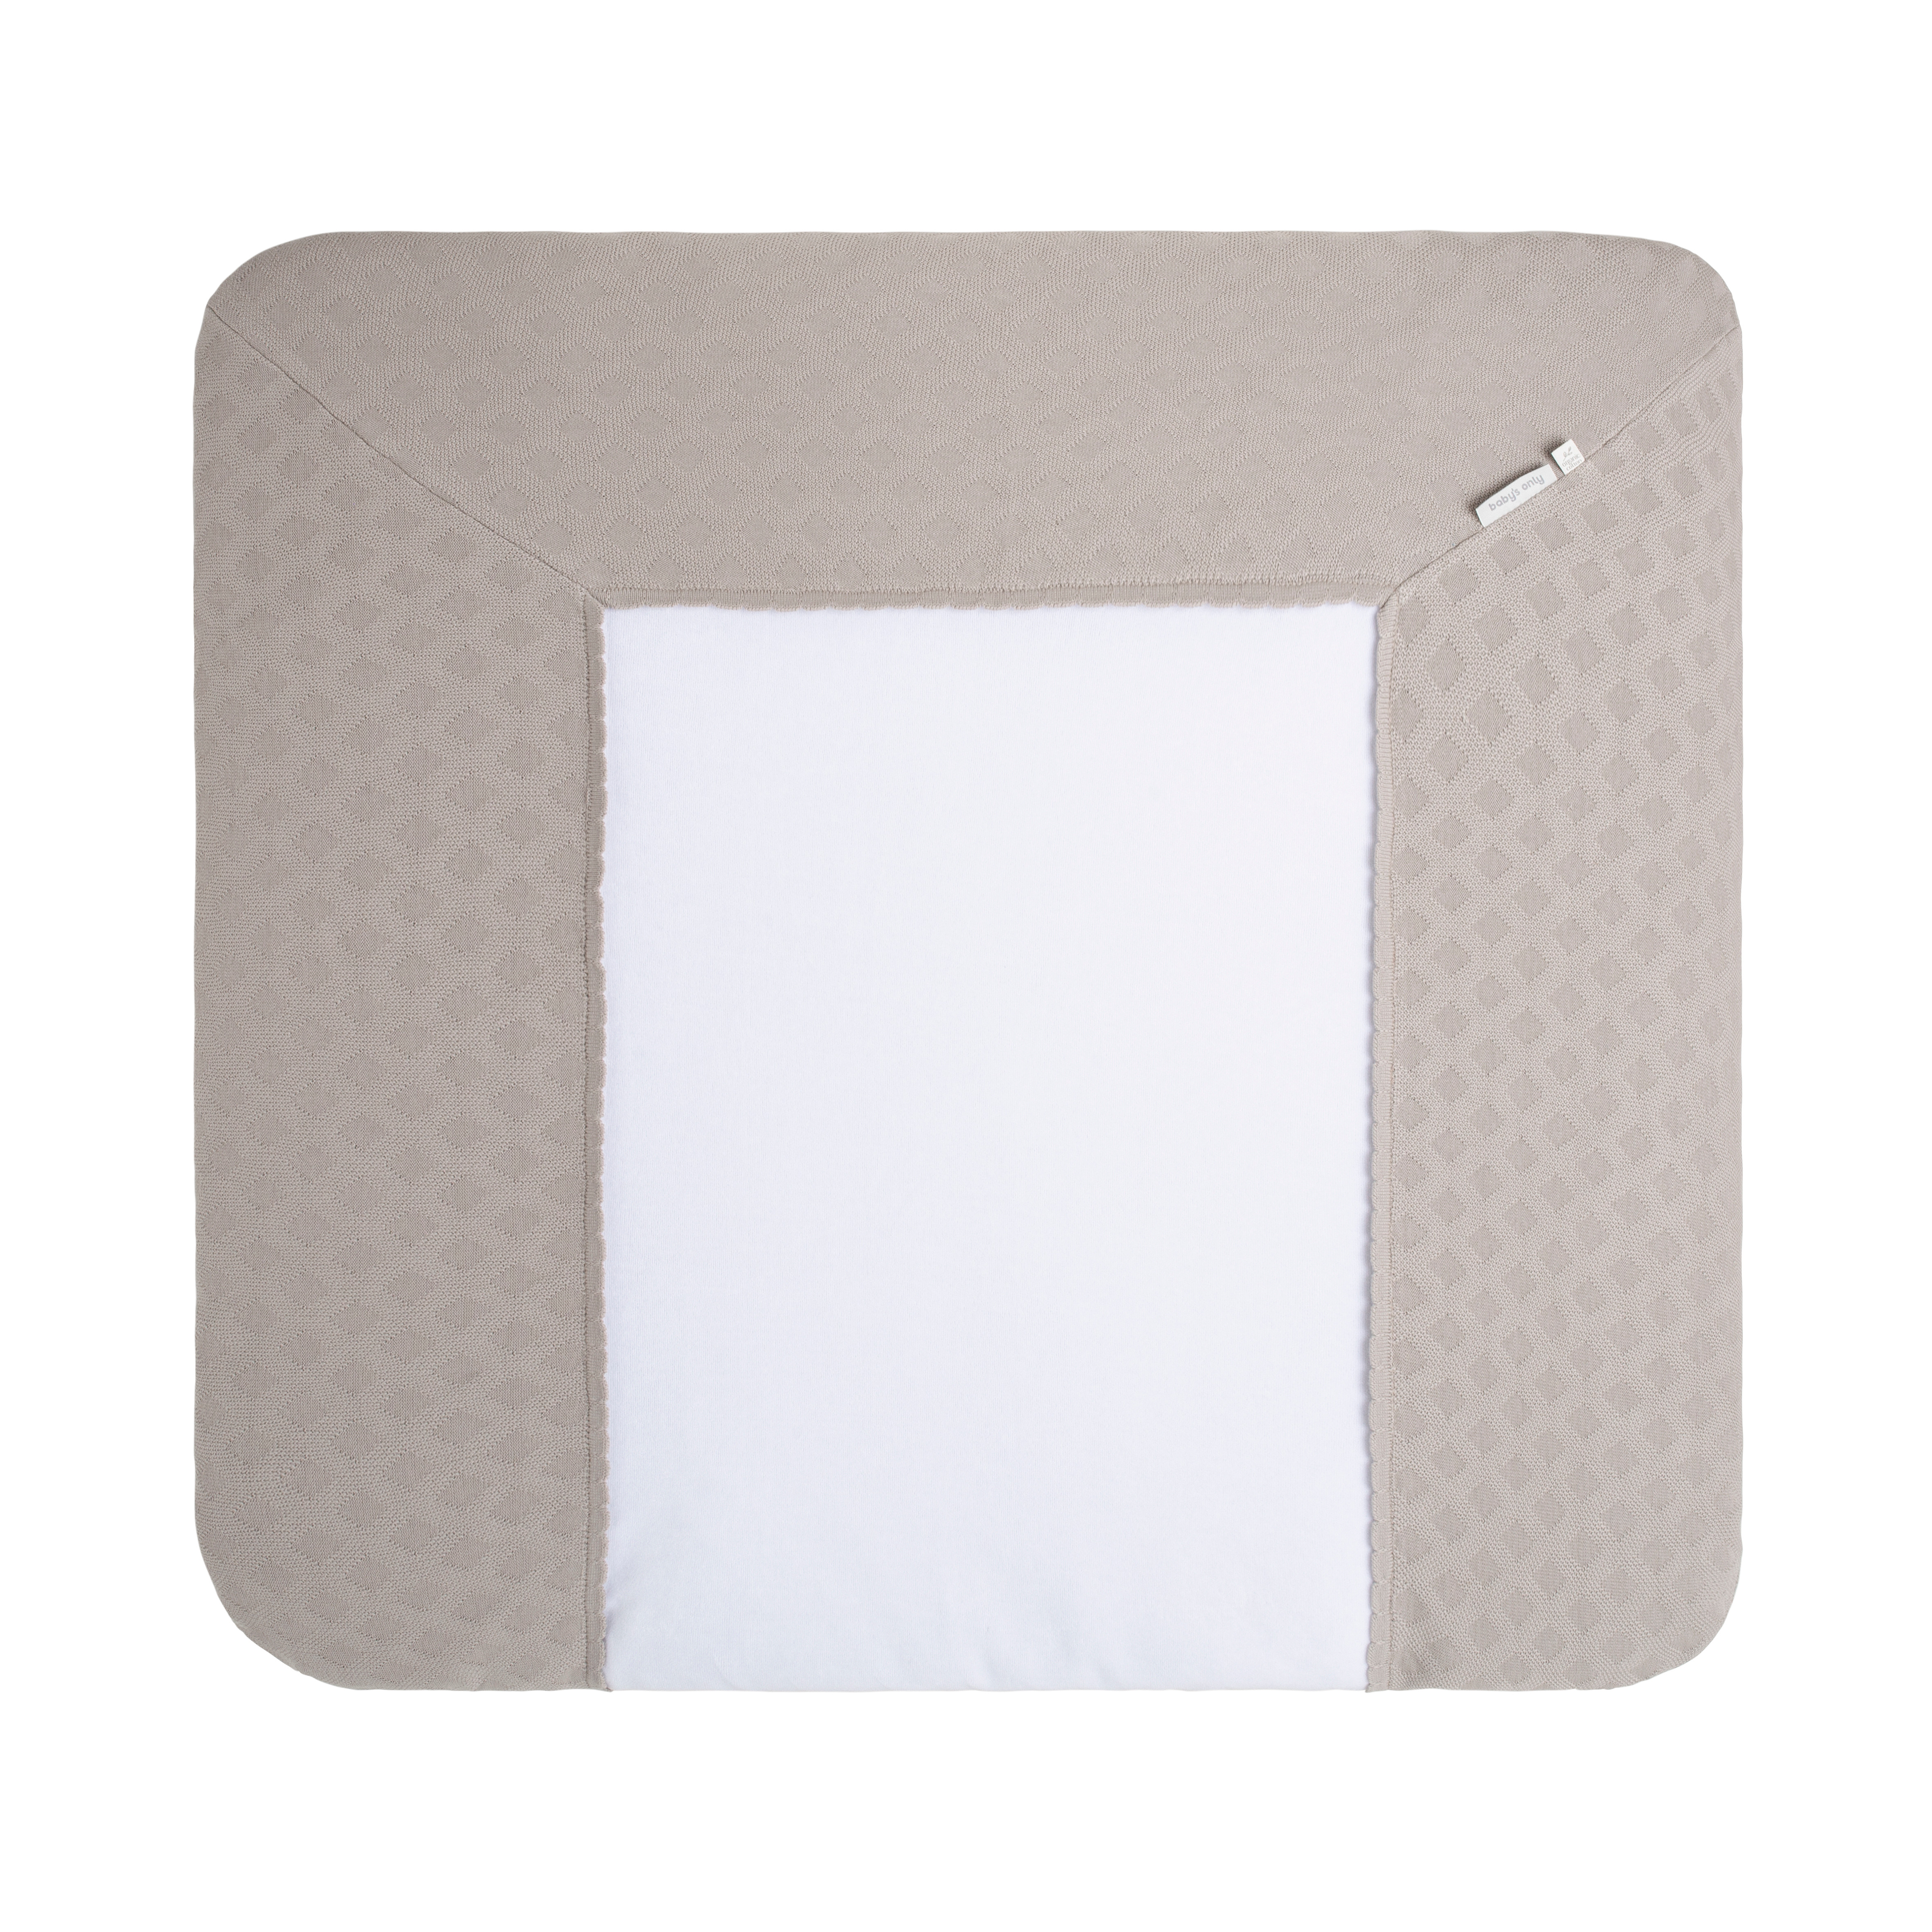 Changing pad cover Reef urban taupe - 75x85